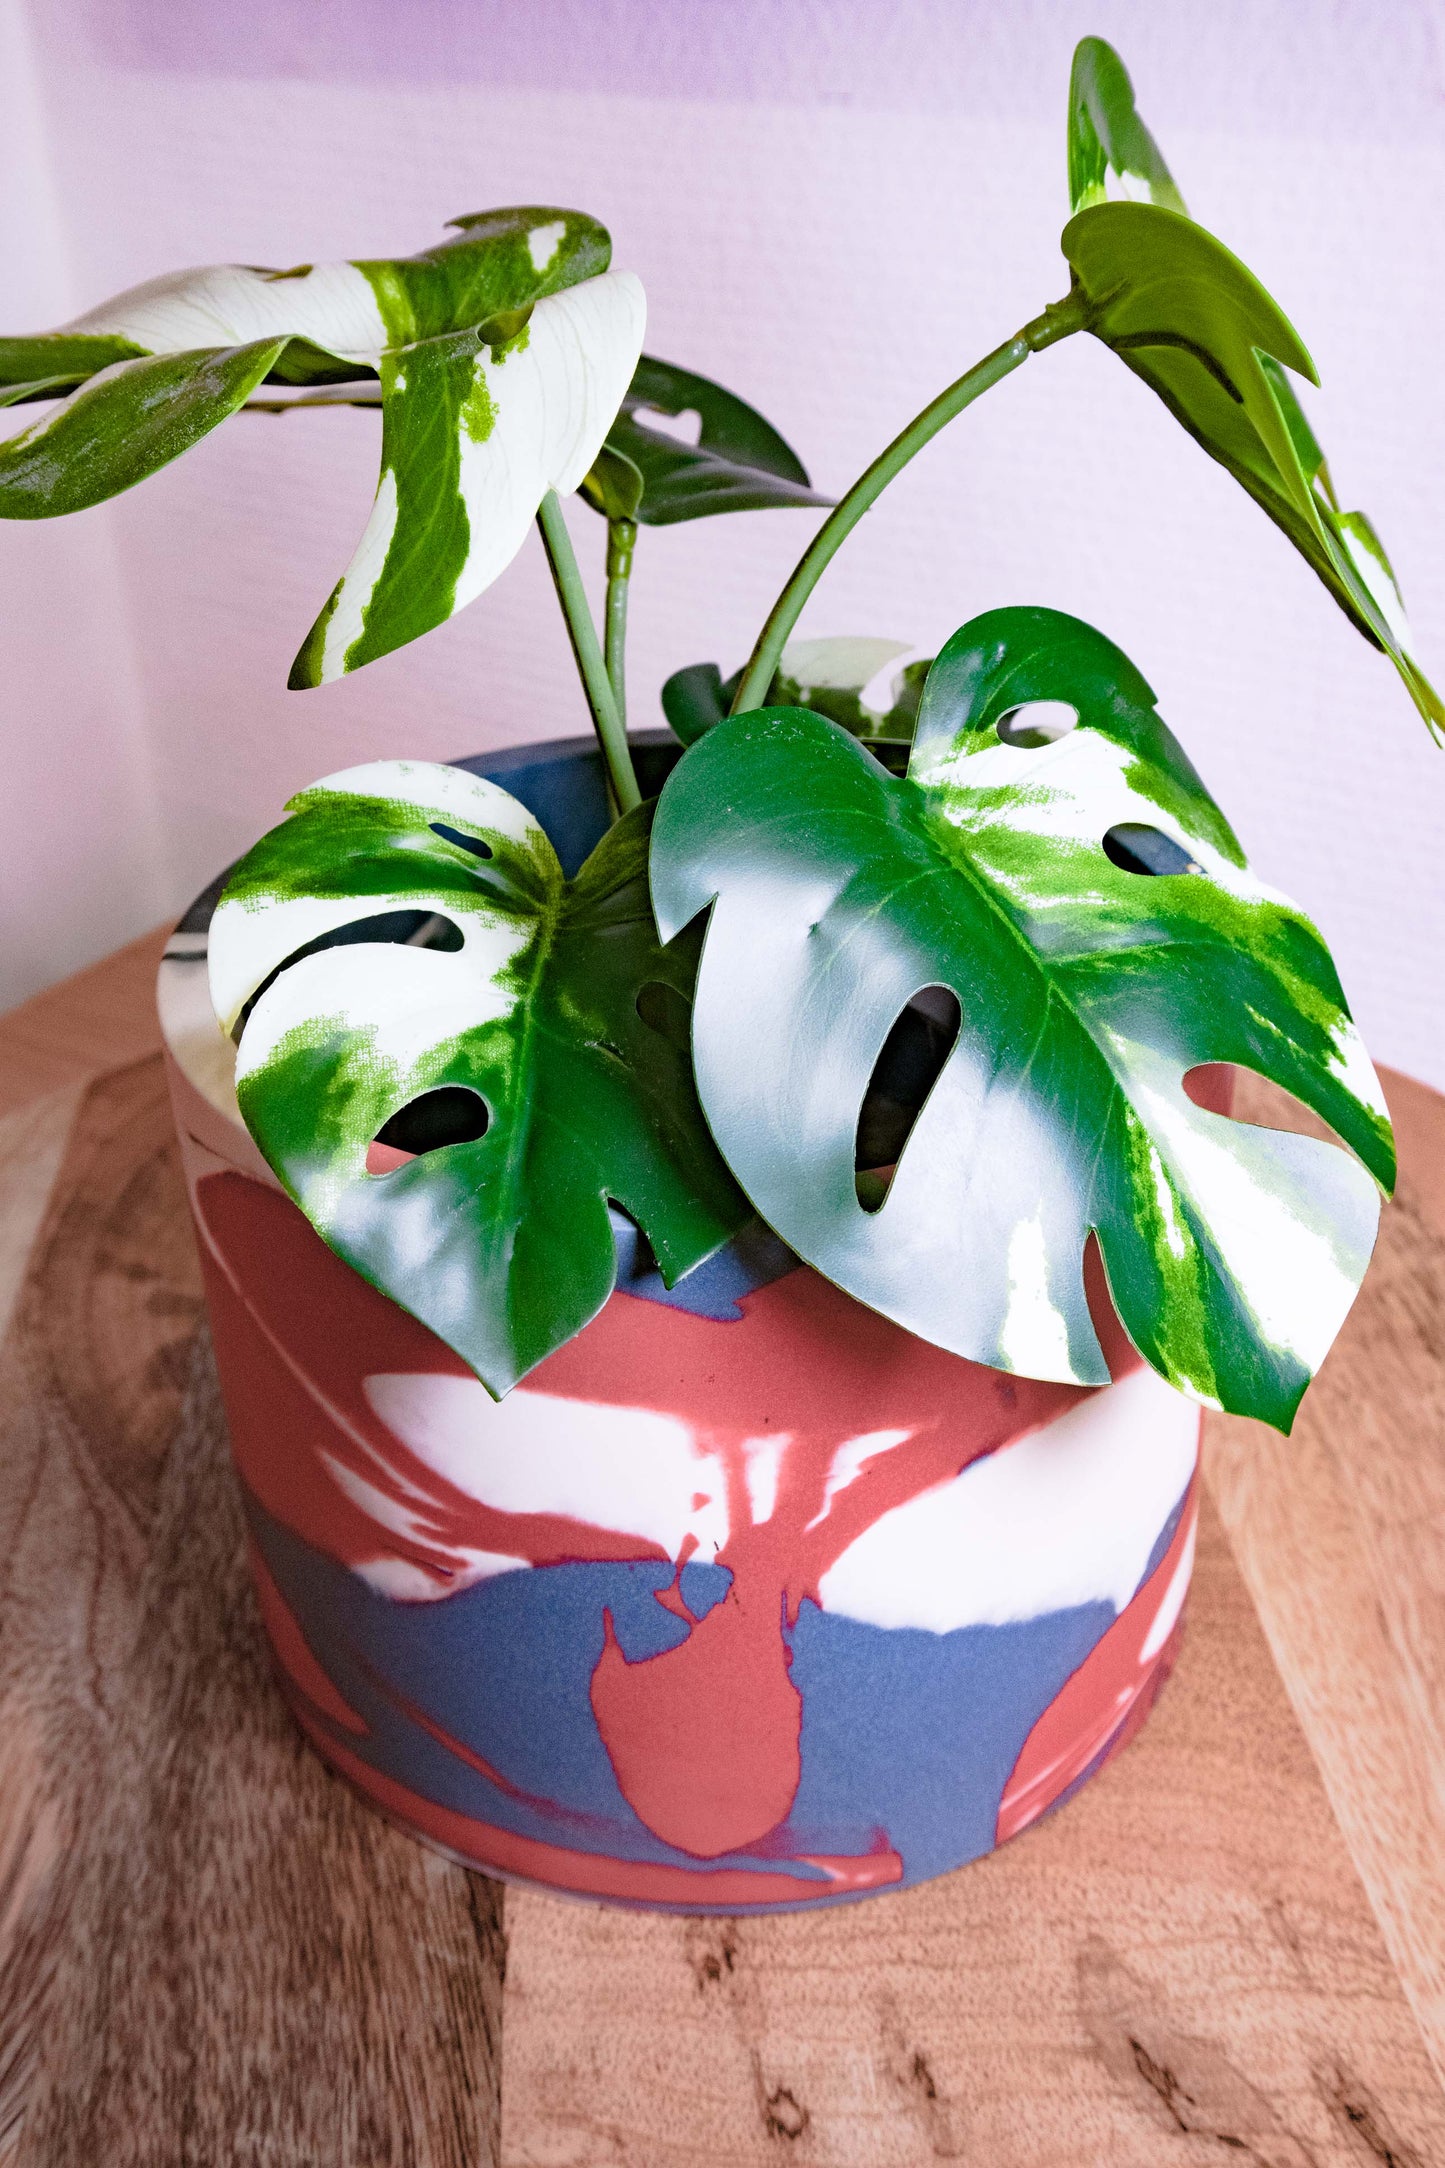 Pot Plant grd - Jesmonite - Blue, red oxyde and white